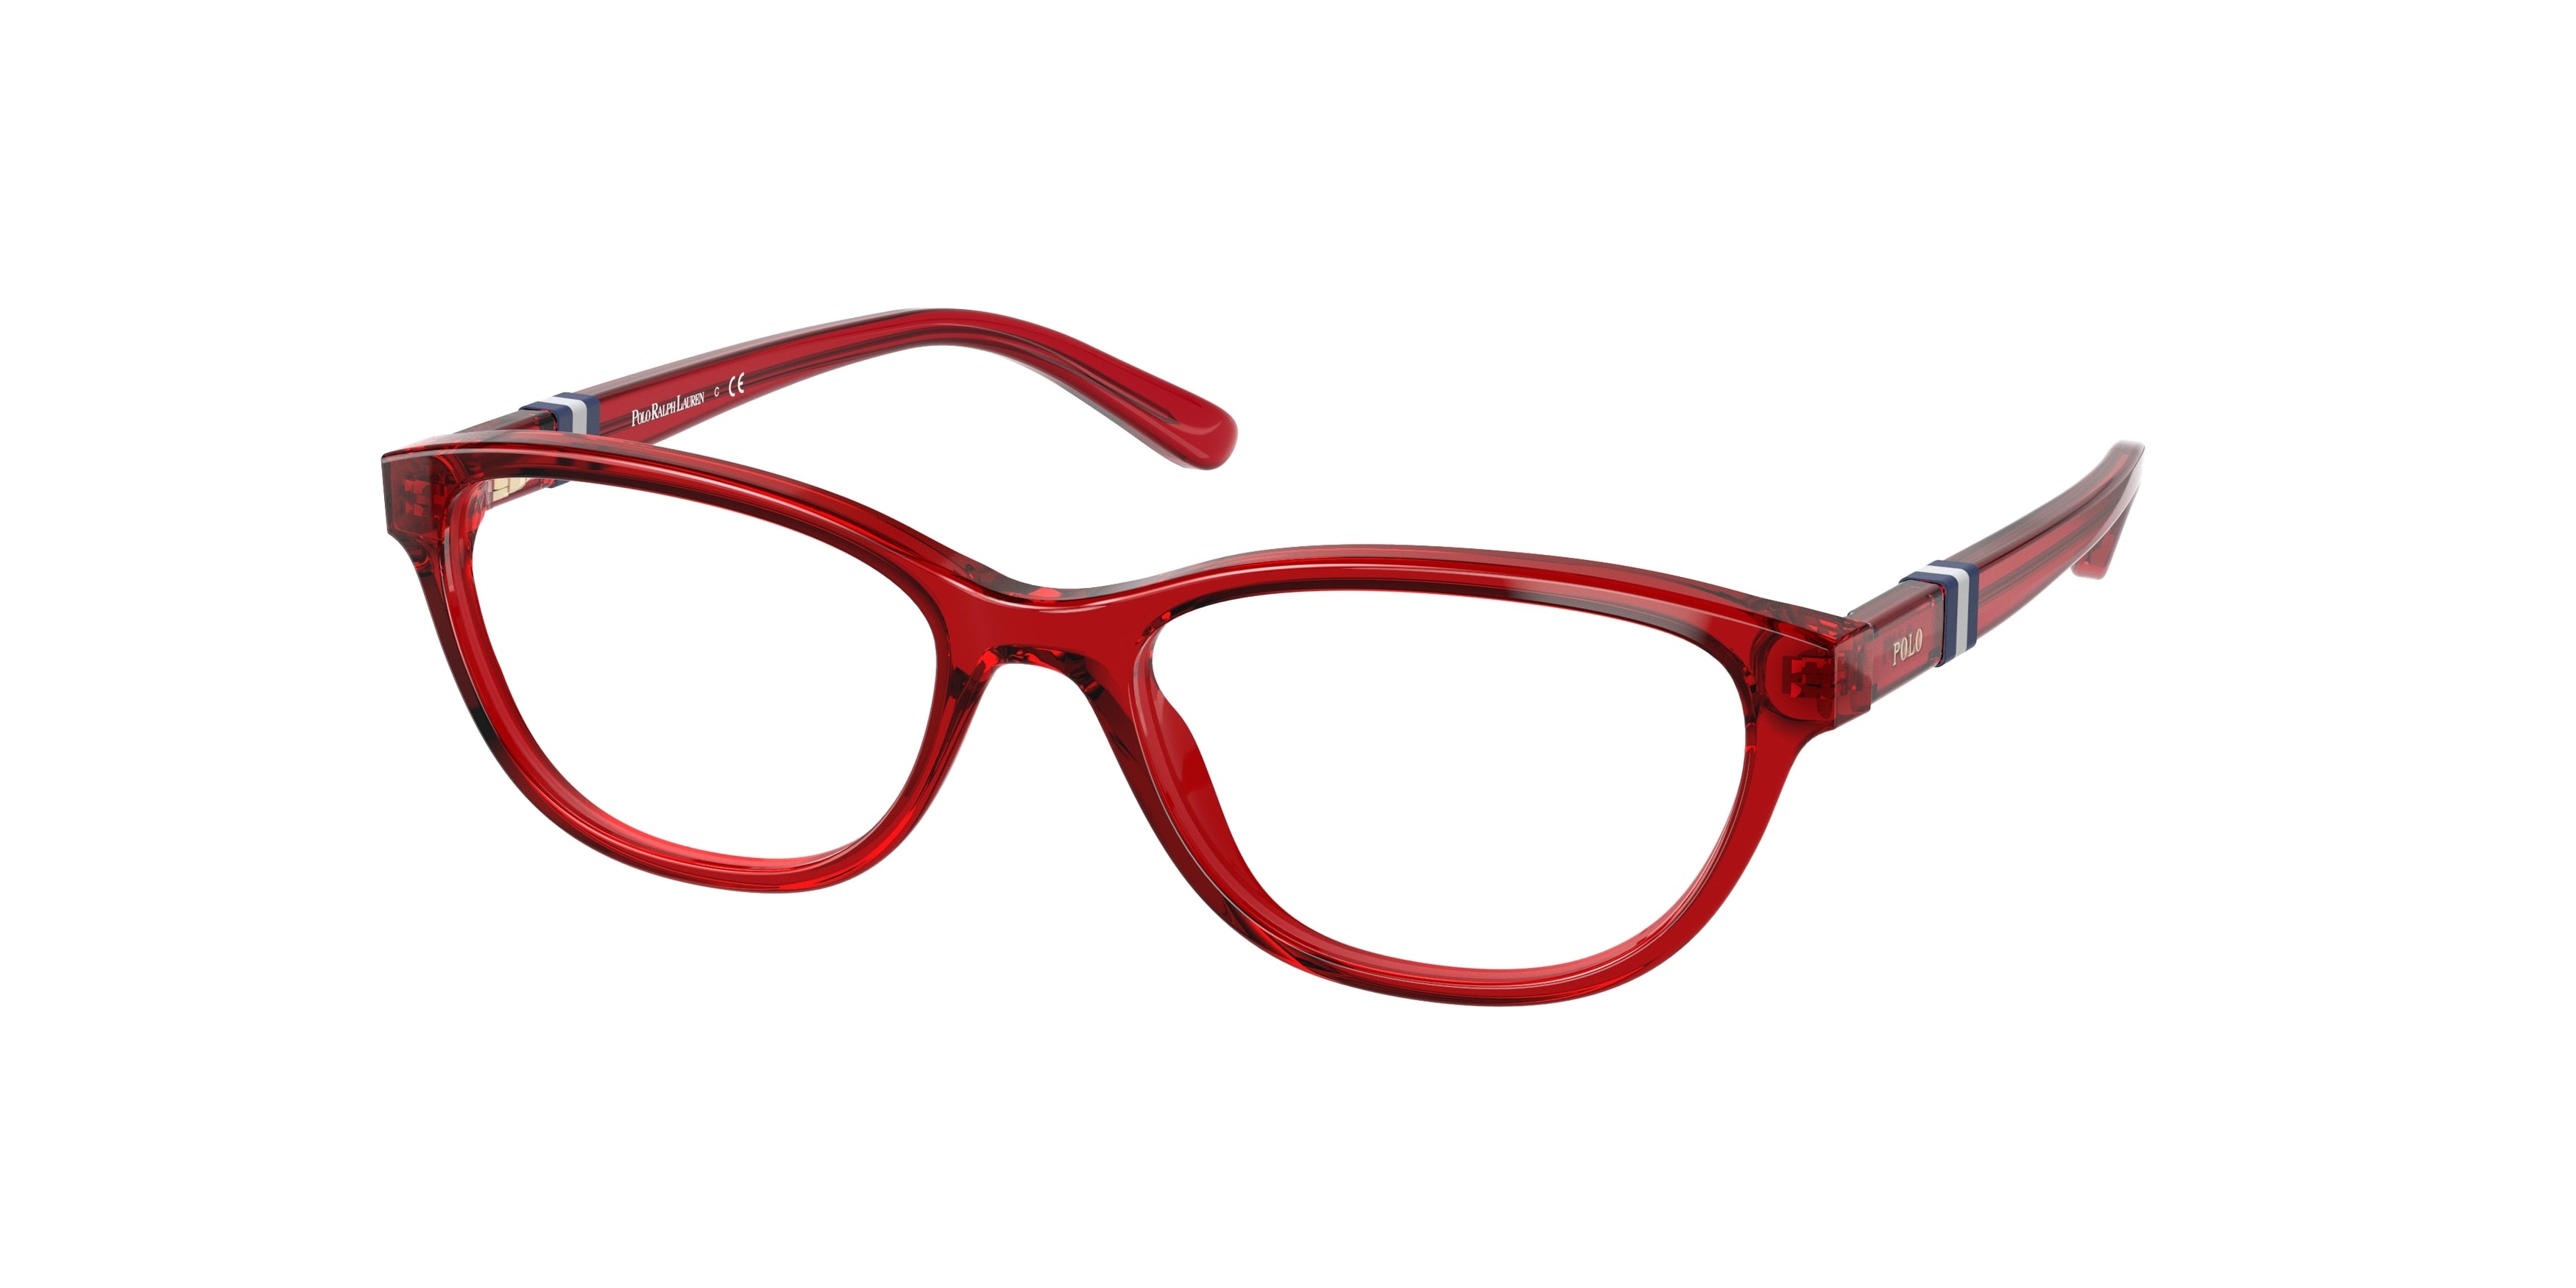 Polo Prep PP8542 Cat Eye Eyeglasses  5458-Shiny Opal Red 48-130-16 - Color Map Red